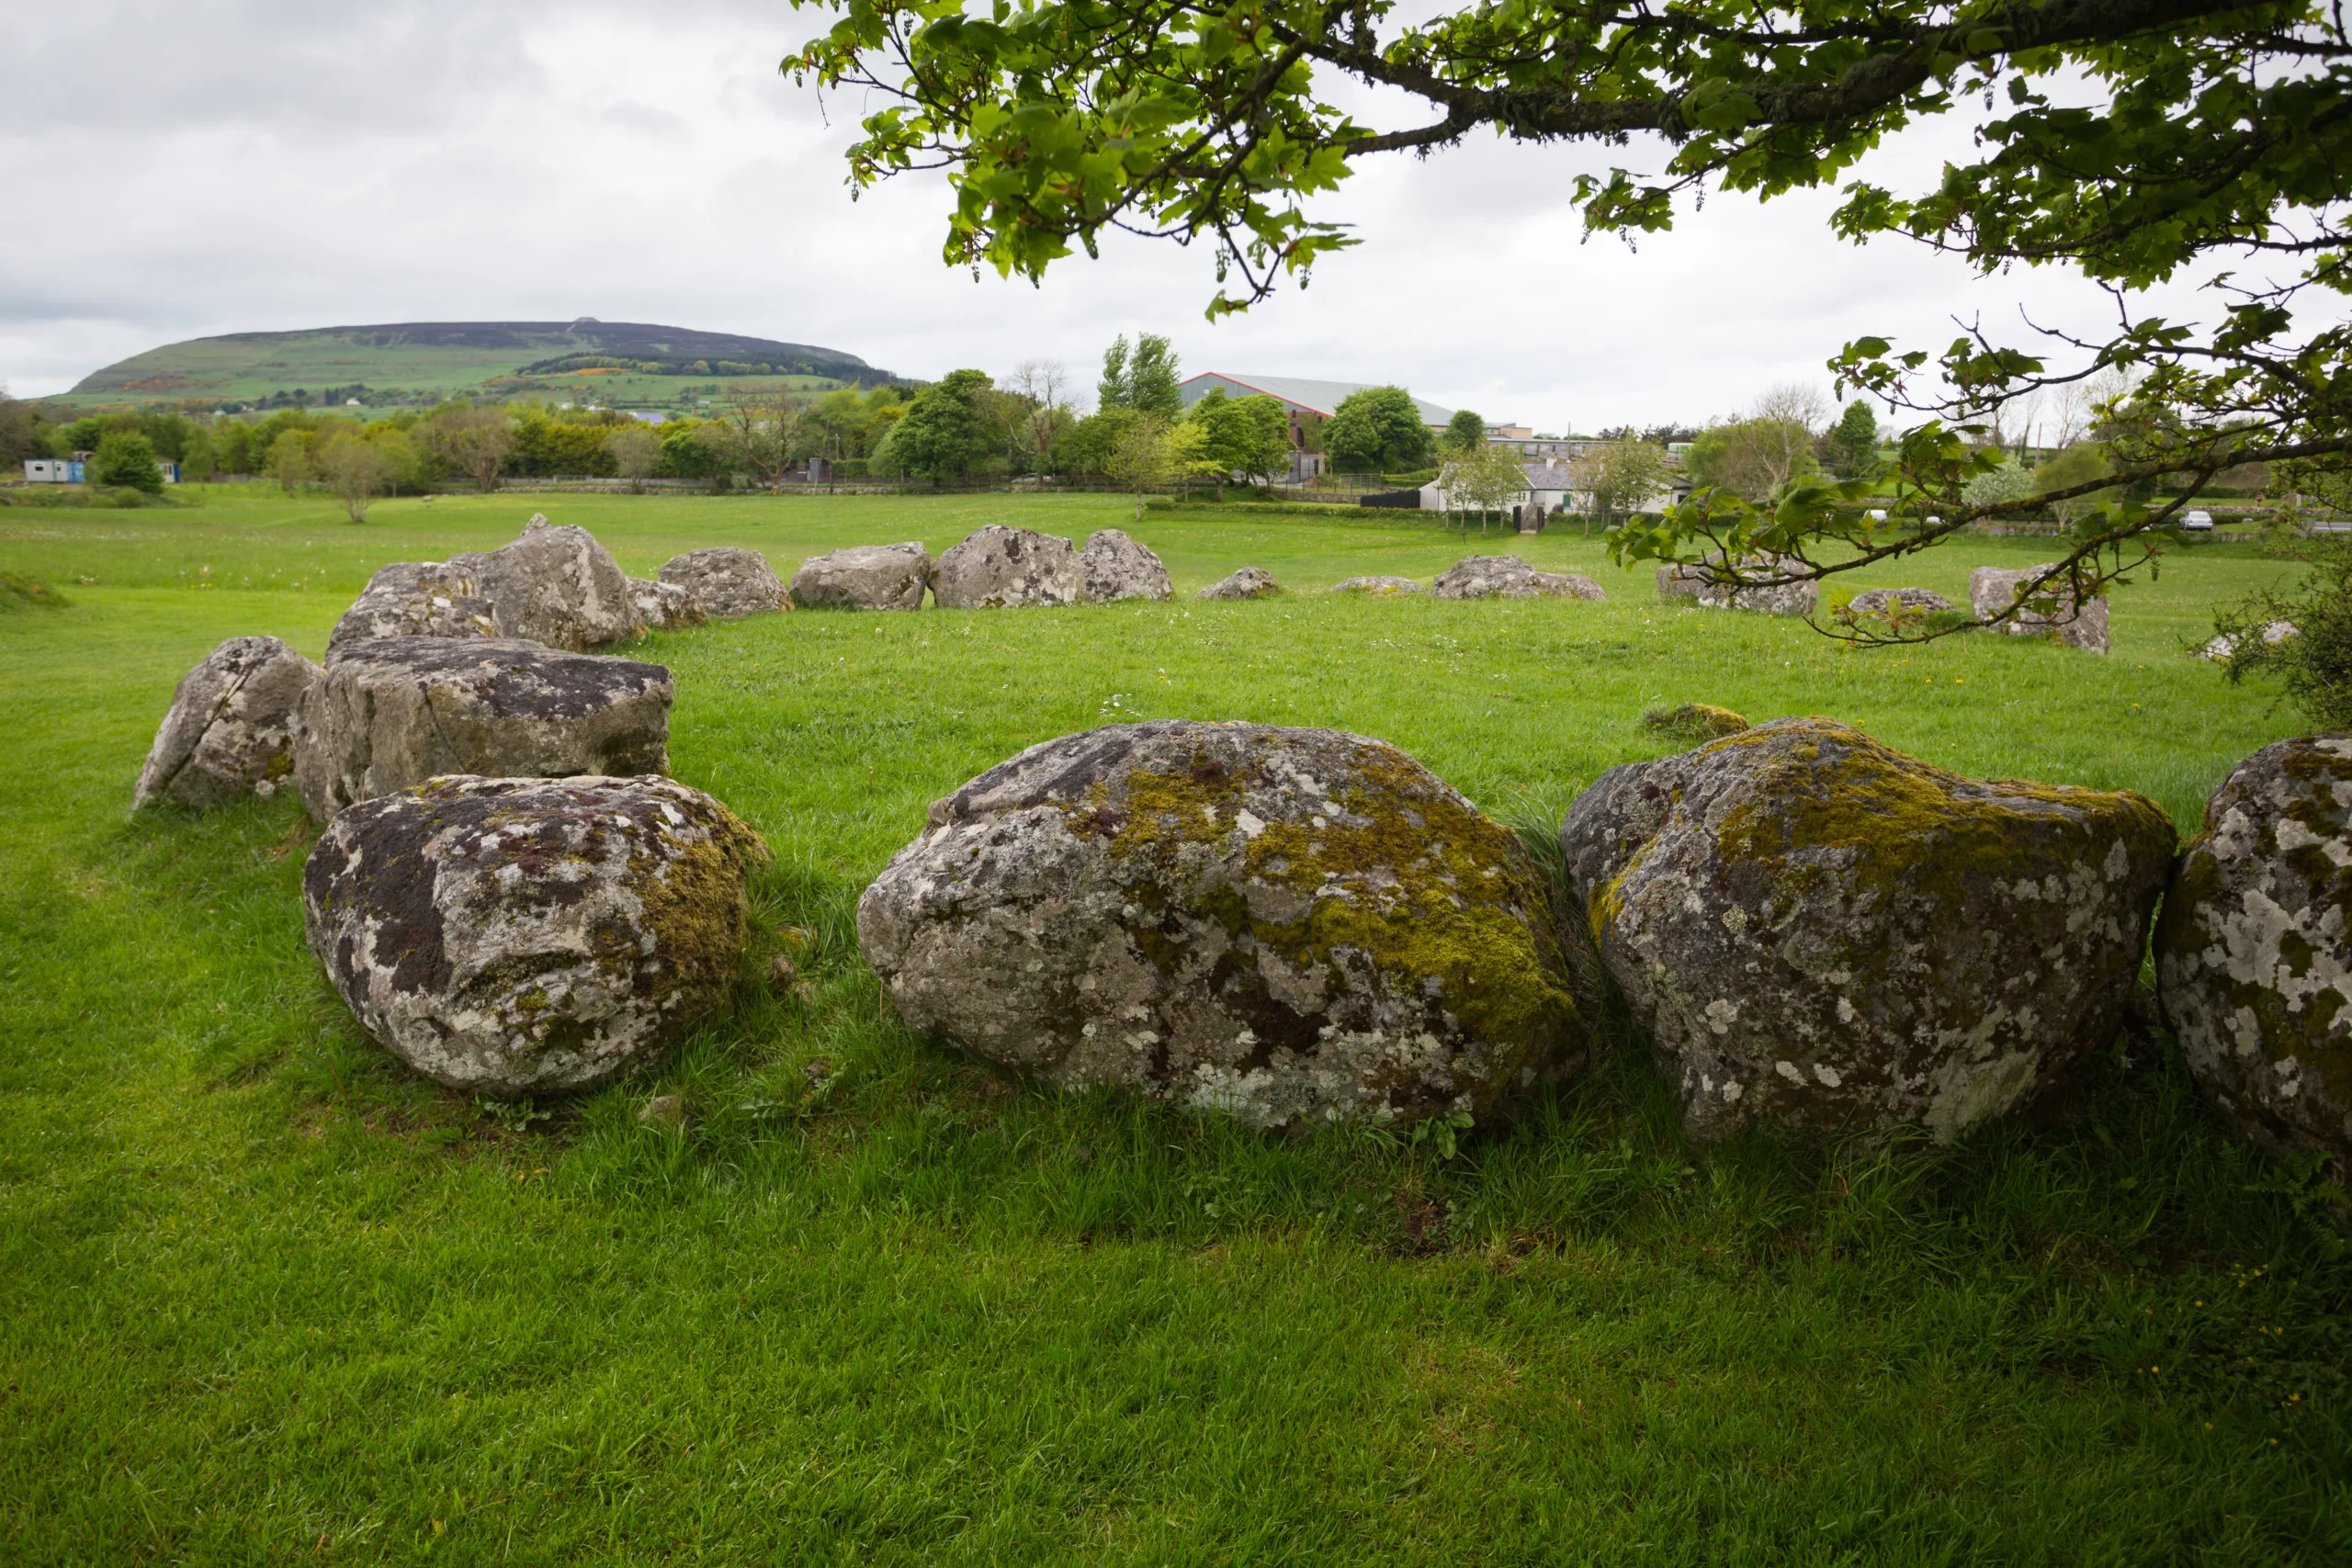 Carrowmore, one of the largest Stone Age cemeteries in Europe